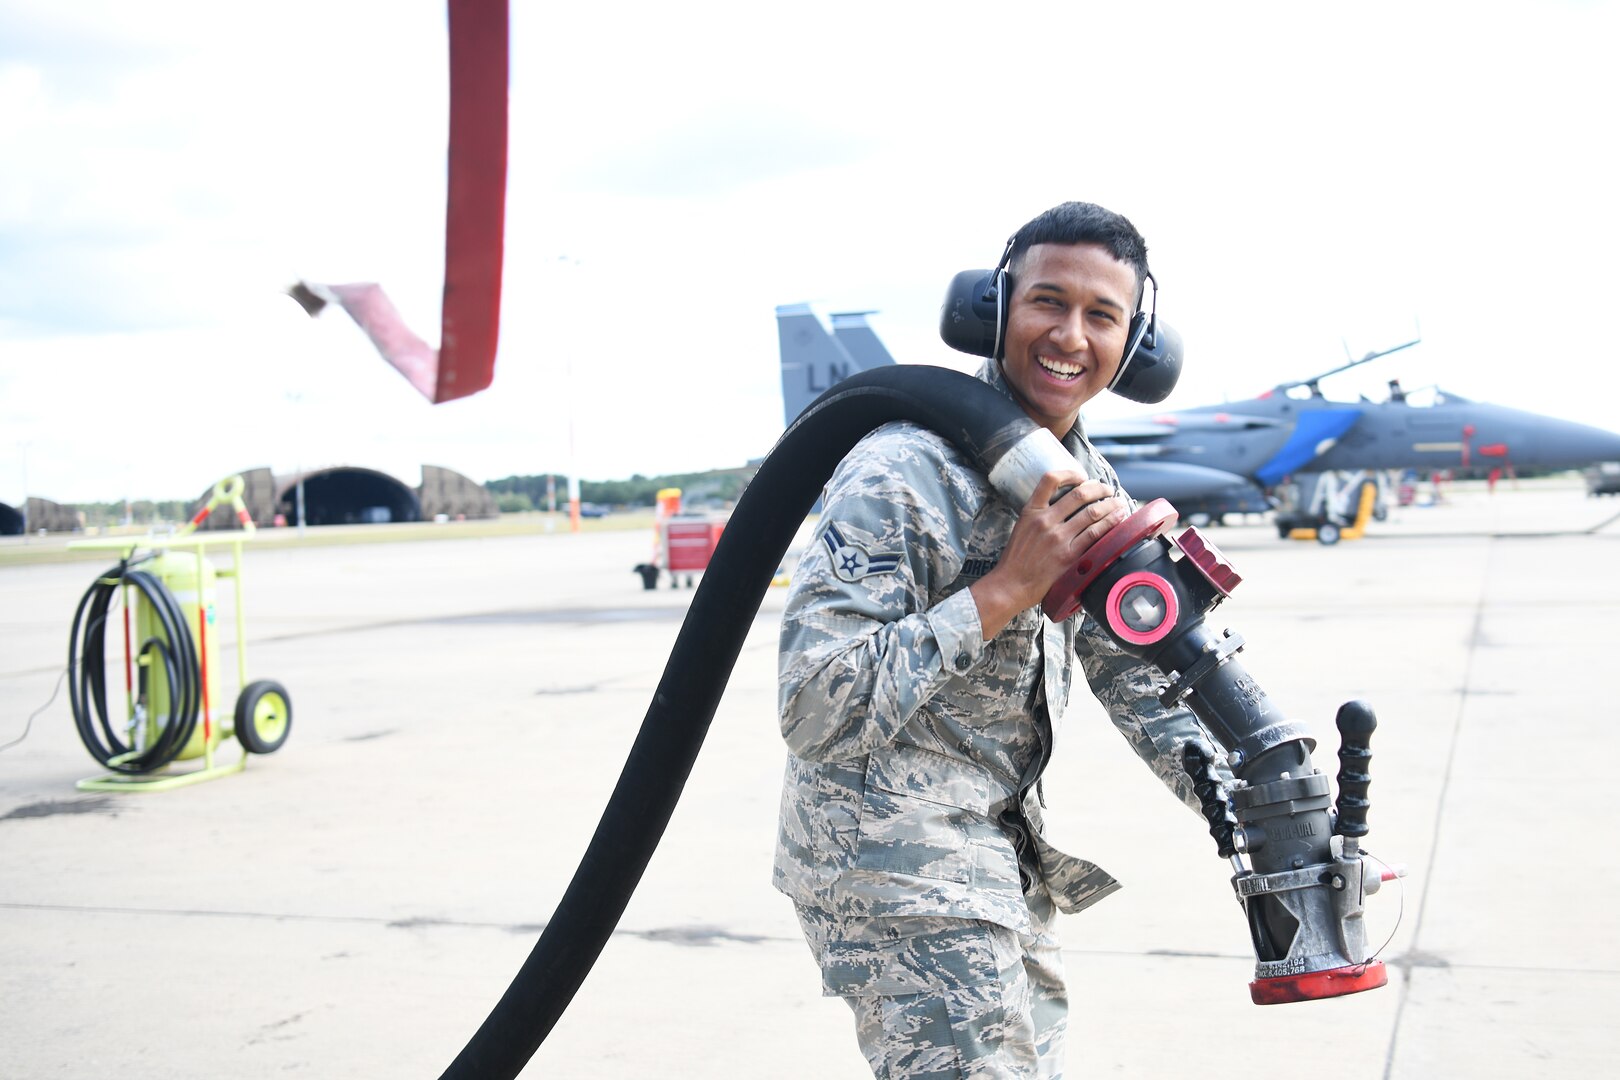 U.S. Air Force Airman 1st Class Christopher Flores-Rivera, 48th Logistics Readiness Squadron fuels distribution operator apprentice, retrieves a fuel line after assisting the refueling of an F-15E Strike Eagle at Royal Air Force Lakenheath, England, Aug. 13, 2019. Fuels Management Flight Airmen are trained and certified to fuel all assets assigned to the Liberty Wing and in charge of six million gallons of fuel to maintain facilities its supporting agencies. (U.S. Air Force photo by Airman 1st Class Shanice Williams-Jones)